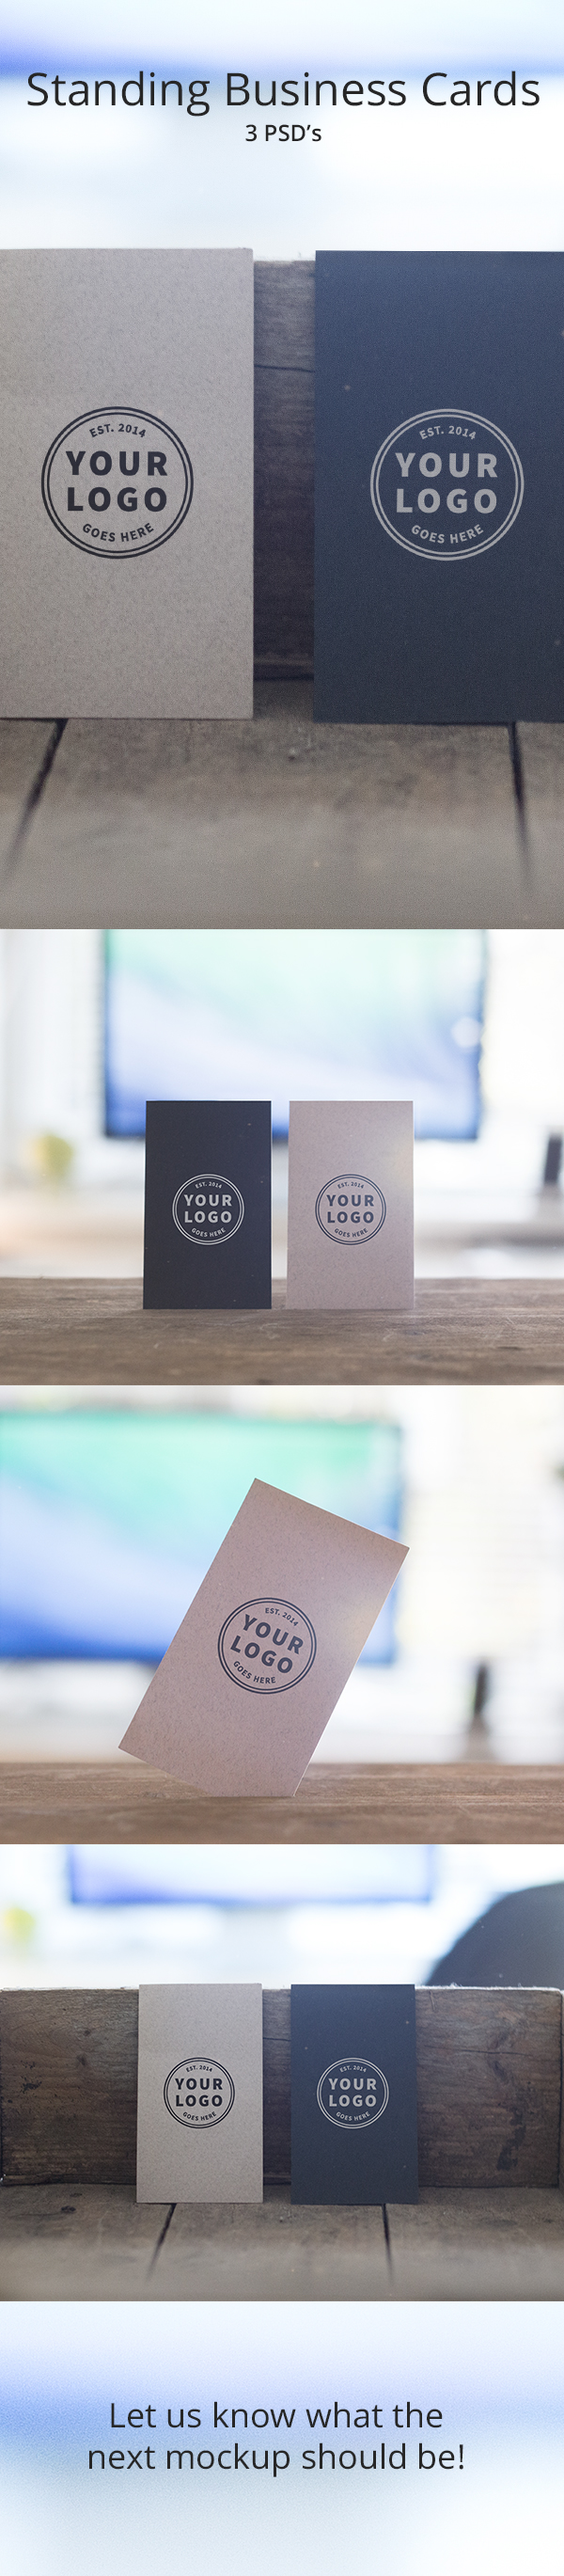 Free Standing Business Cards Mockups. 3 PSD's